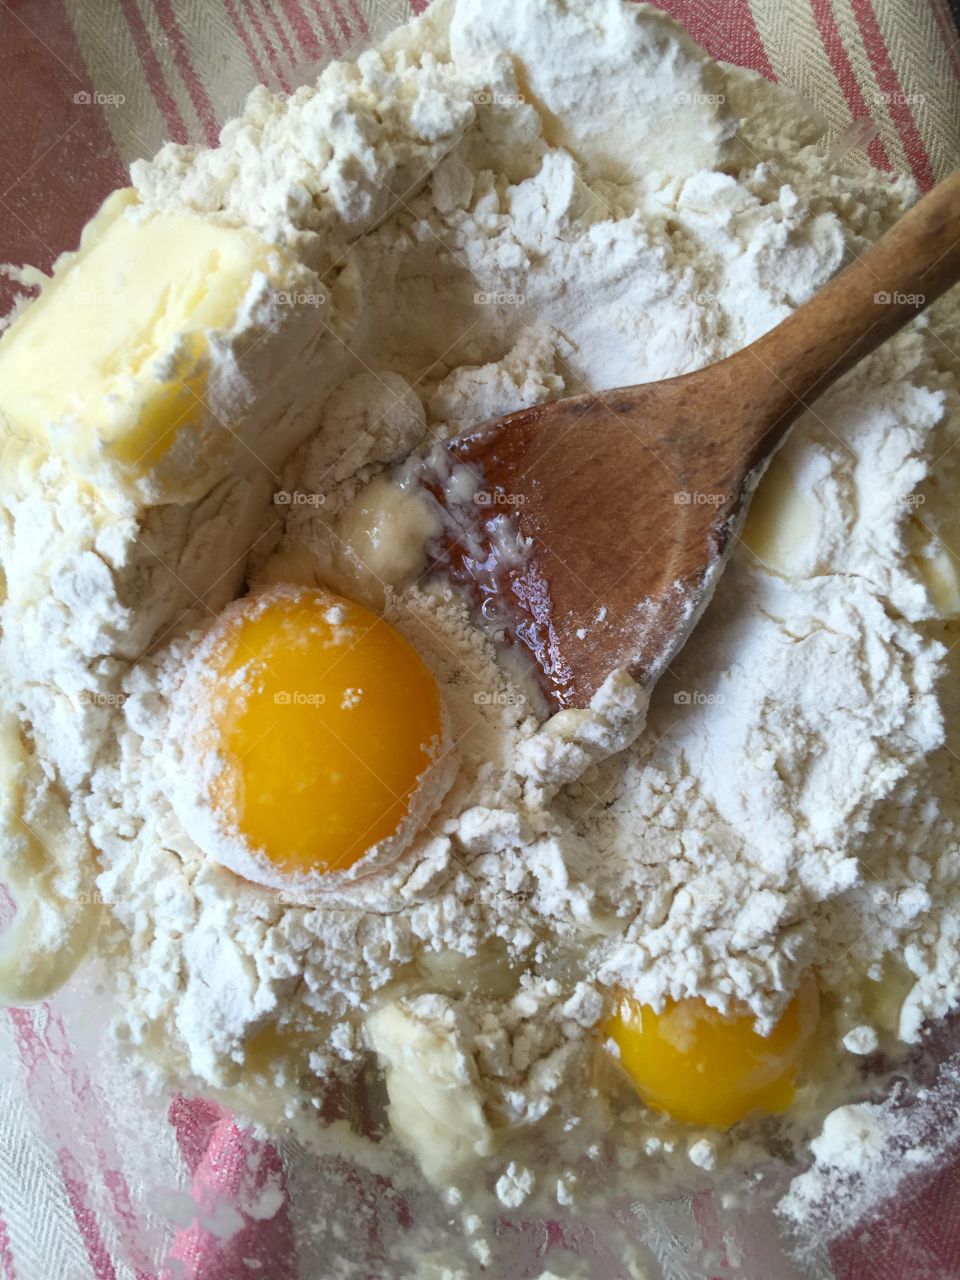 Mixing flour, butter and egg